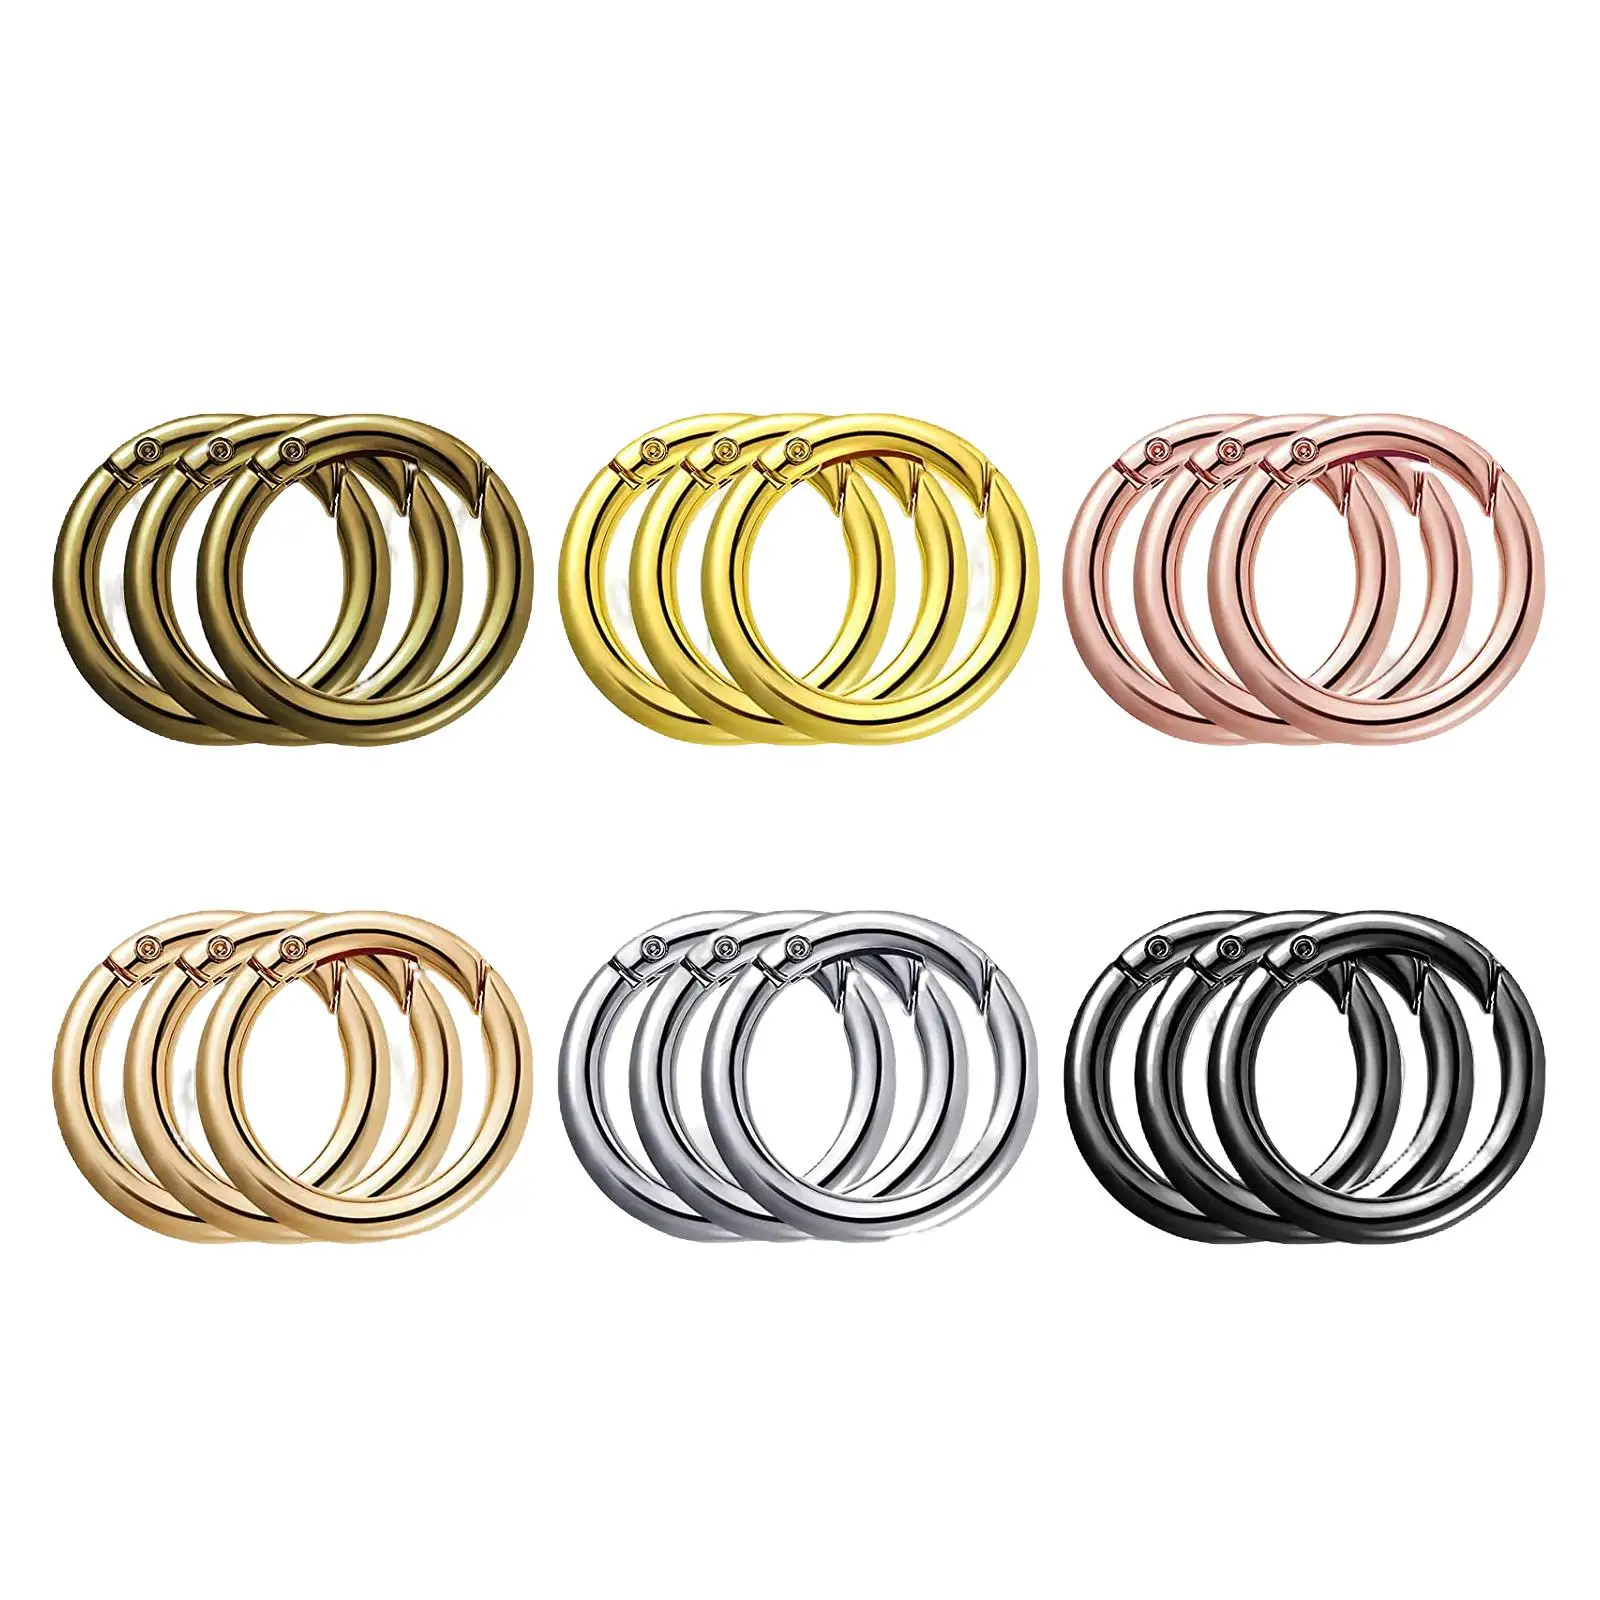 18Pcs Spring Gate O Rings Spring Clip Round Carabiner Snap Clip Push Gate Snap Hook Keyring Buckle Metal for Jewelry Making Bag